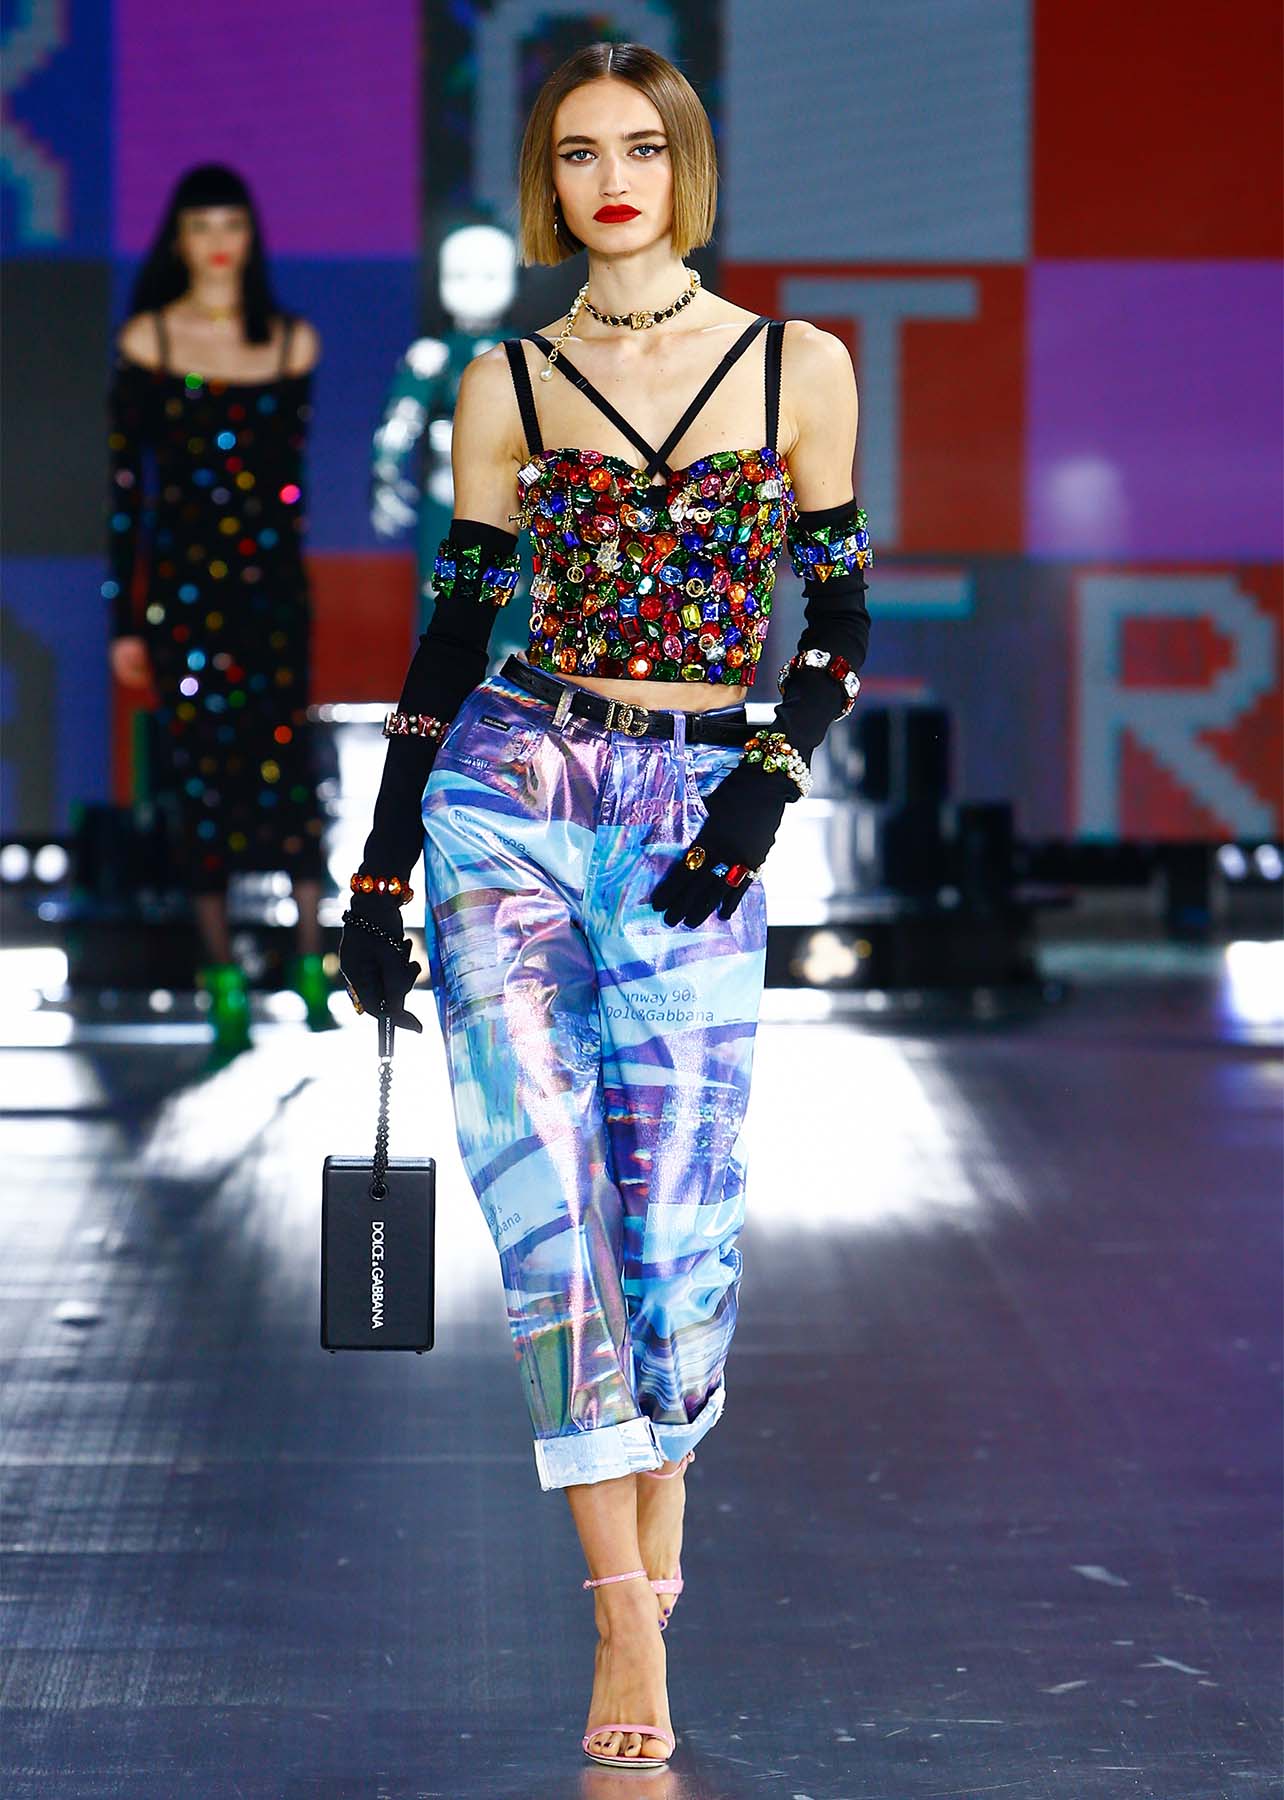 Woman walking on runway in a rainbow embellished crop top bustier, blue patterned trousers, heeled sandals and black gloves